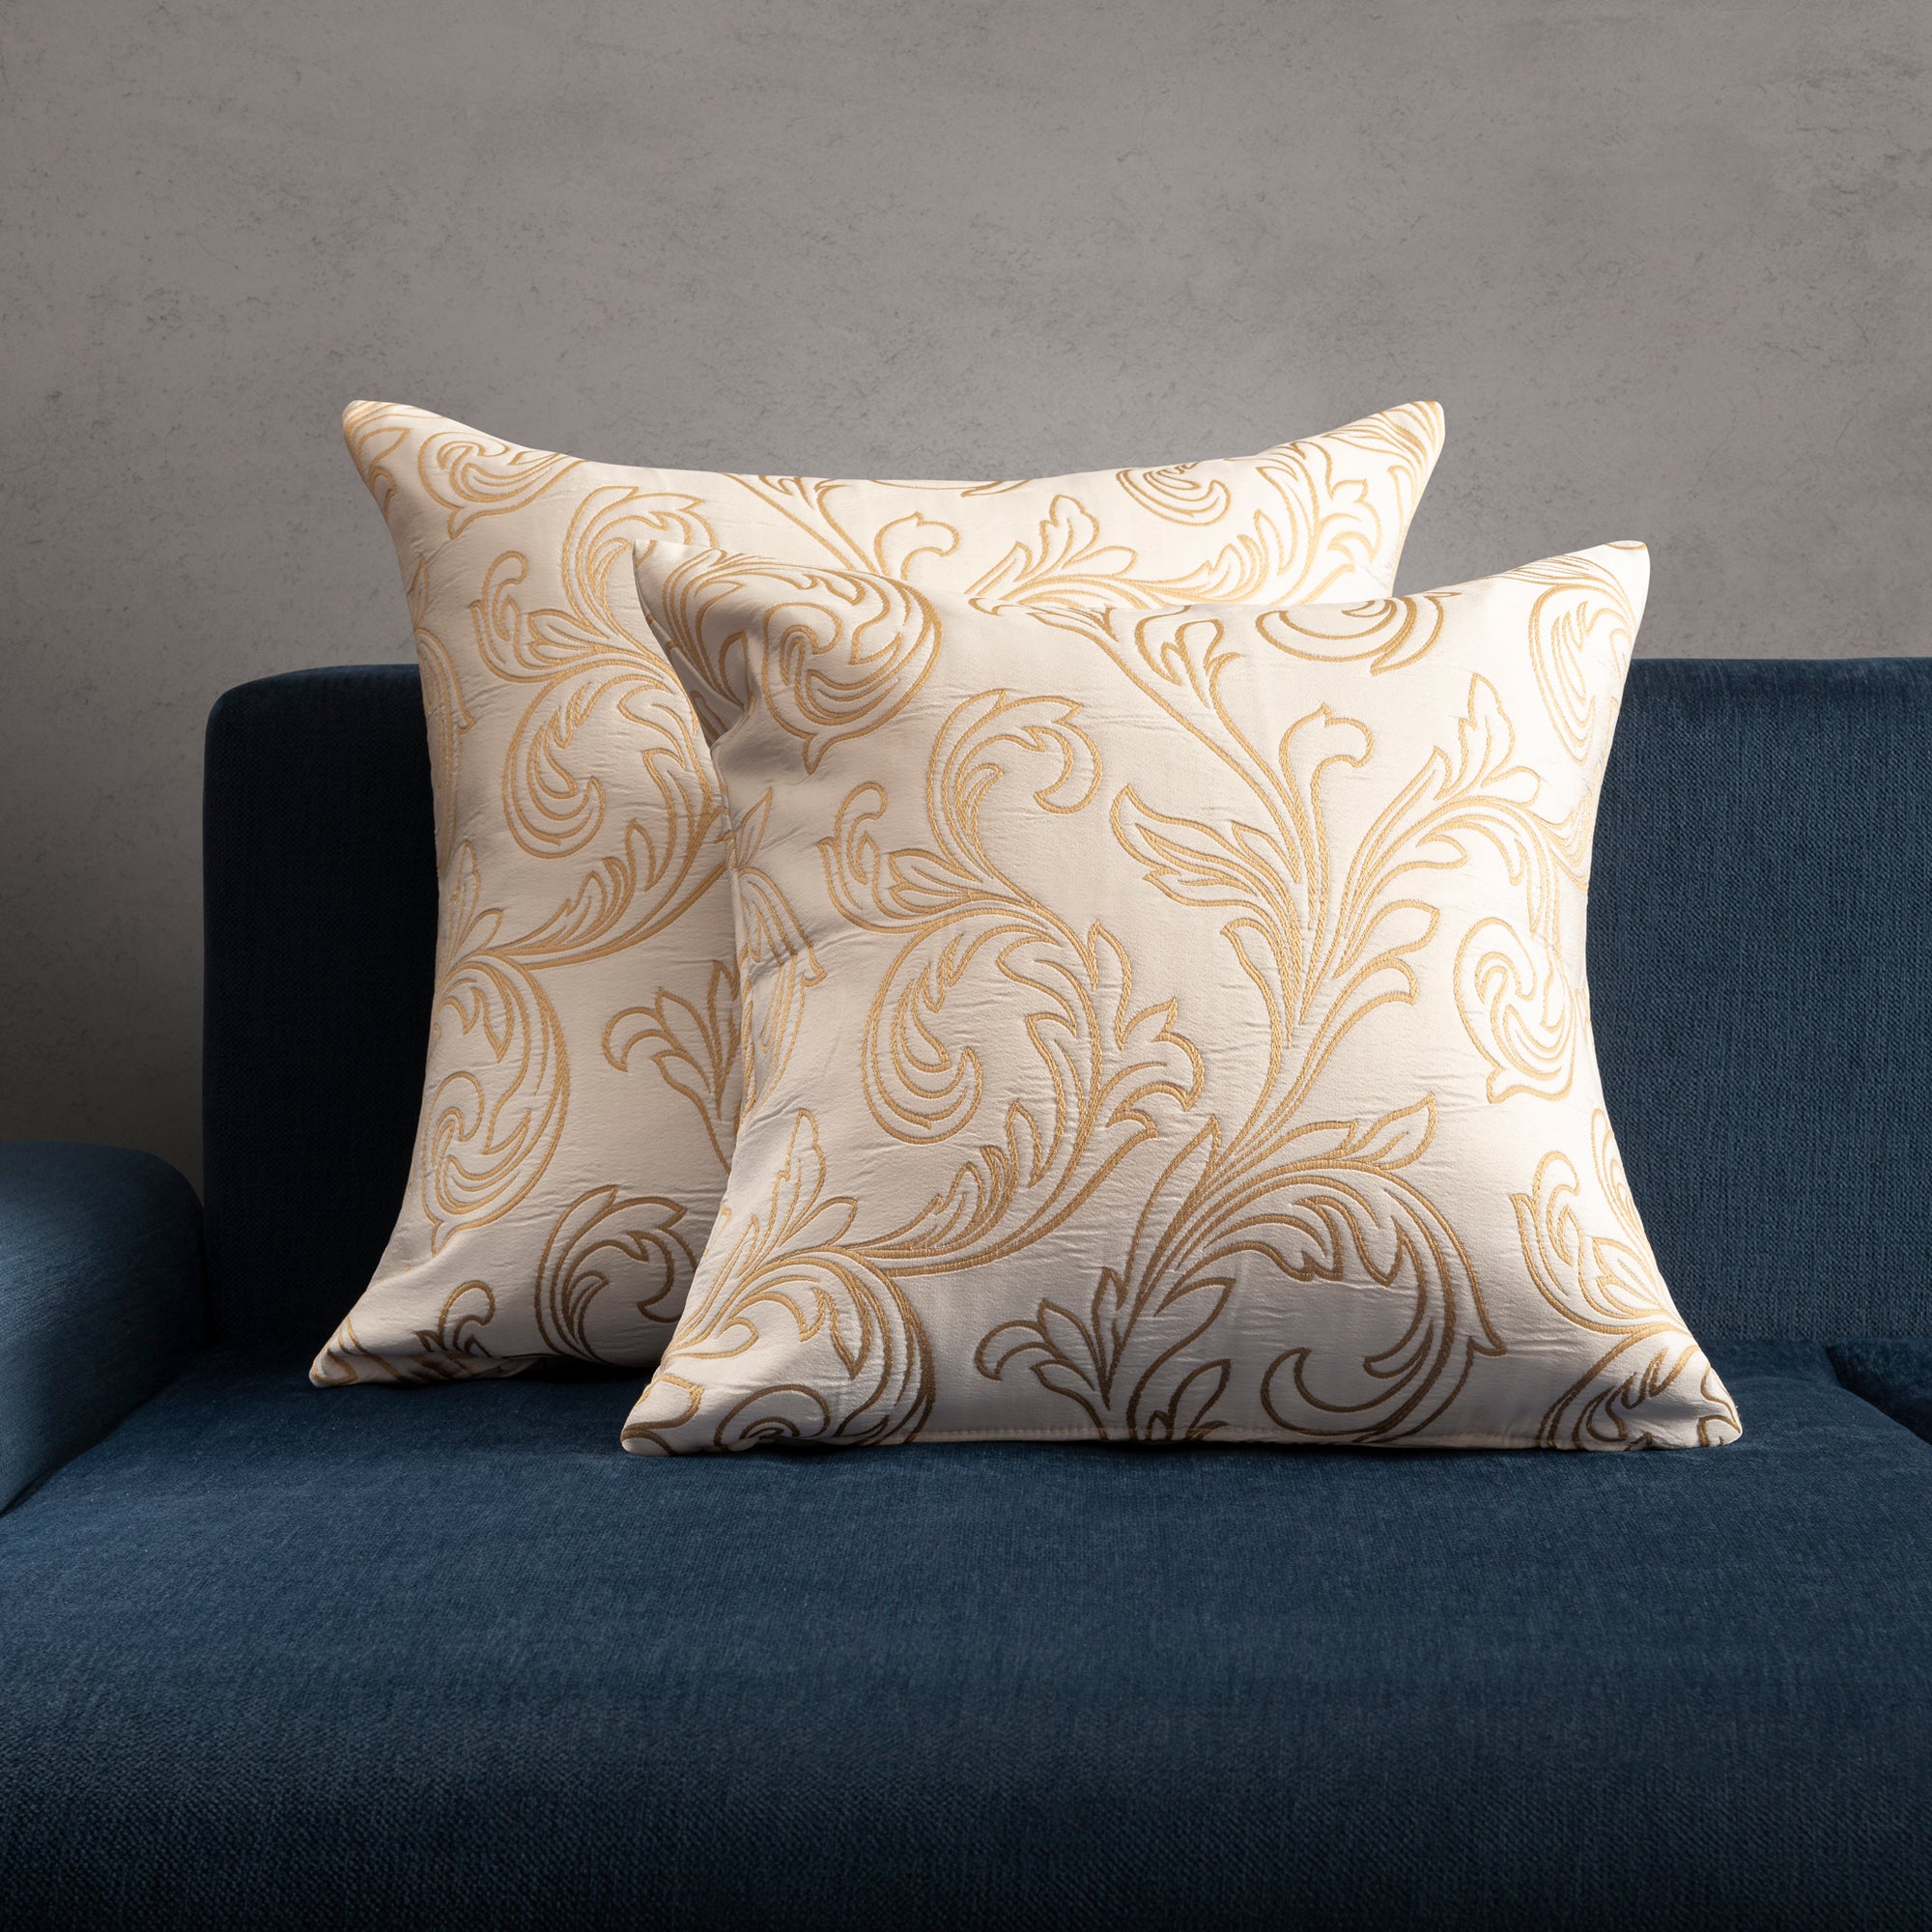 Beautiful Coral Patterned Decorative Pillows